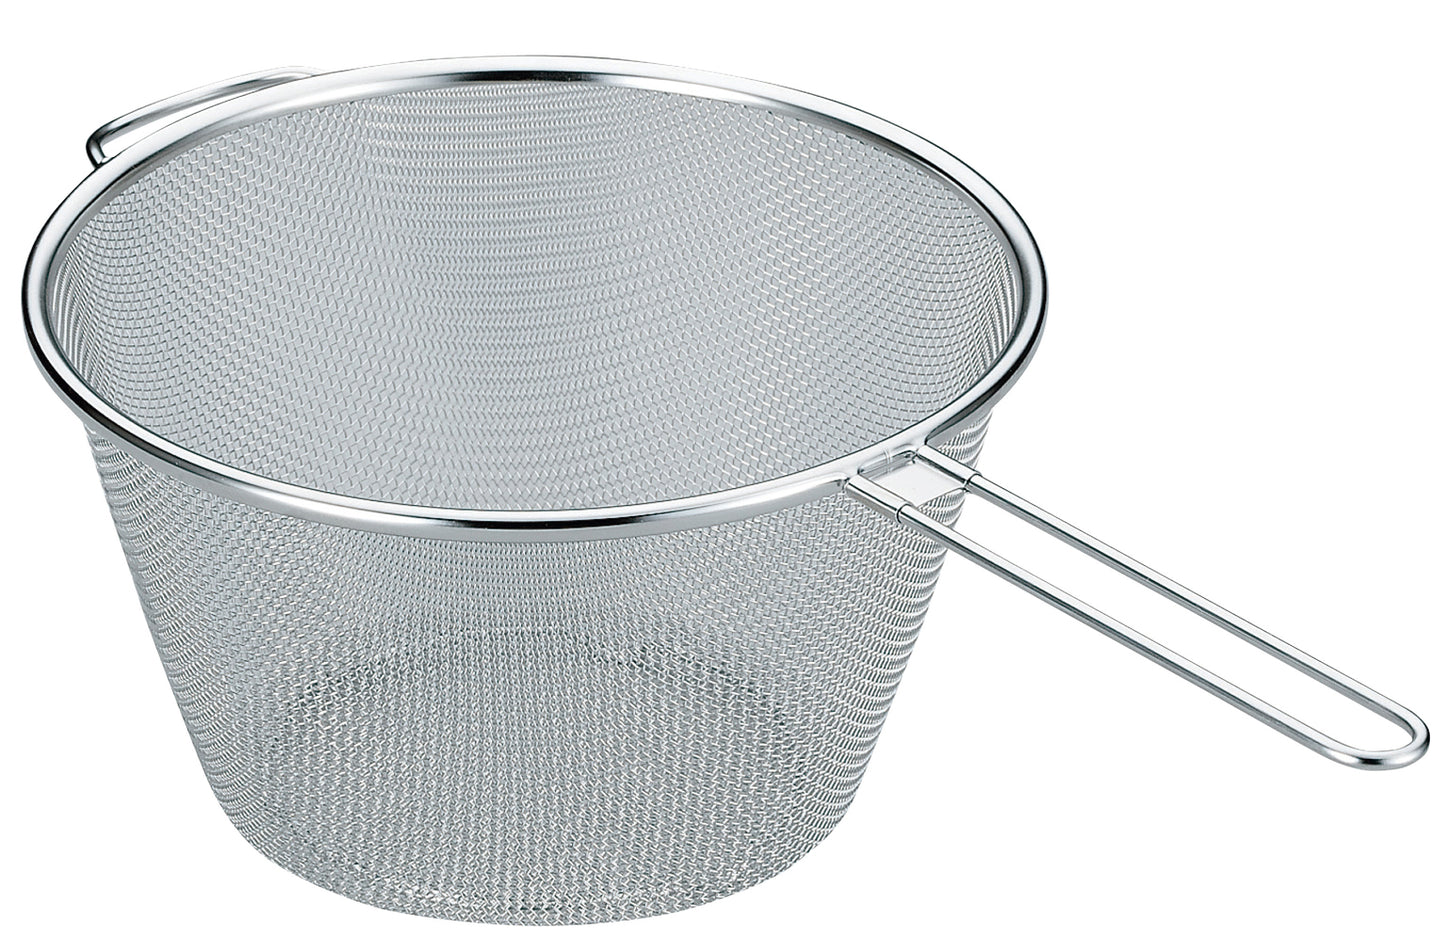 Stainless-Steel Rasutexia Boil Strainer with Stand (12mesh)